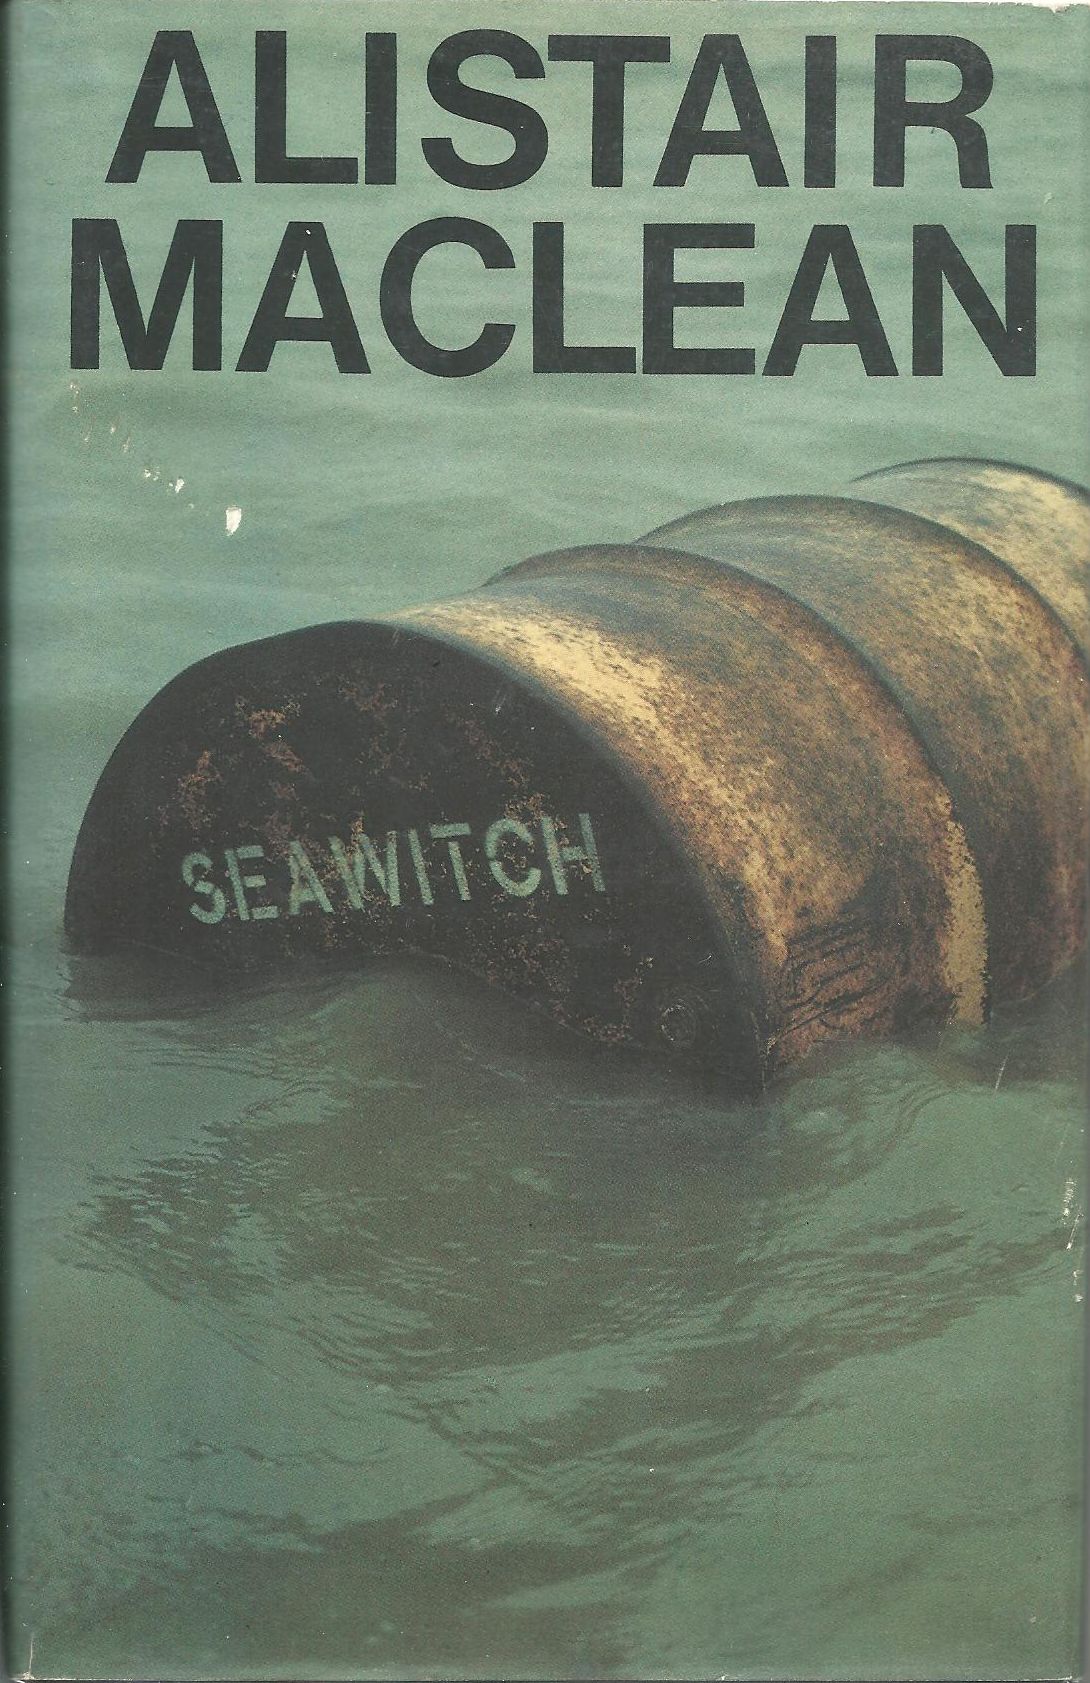 Seawitch - UK first edition